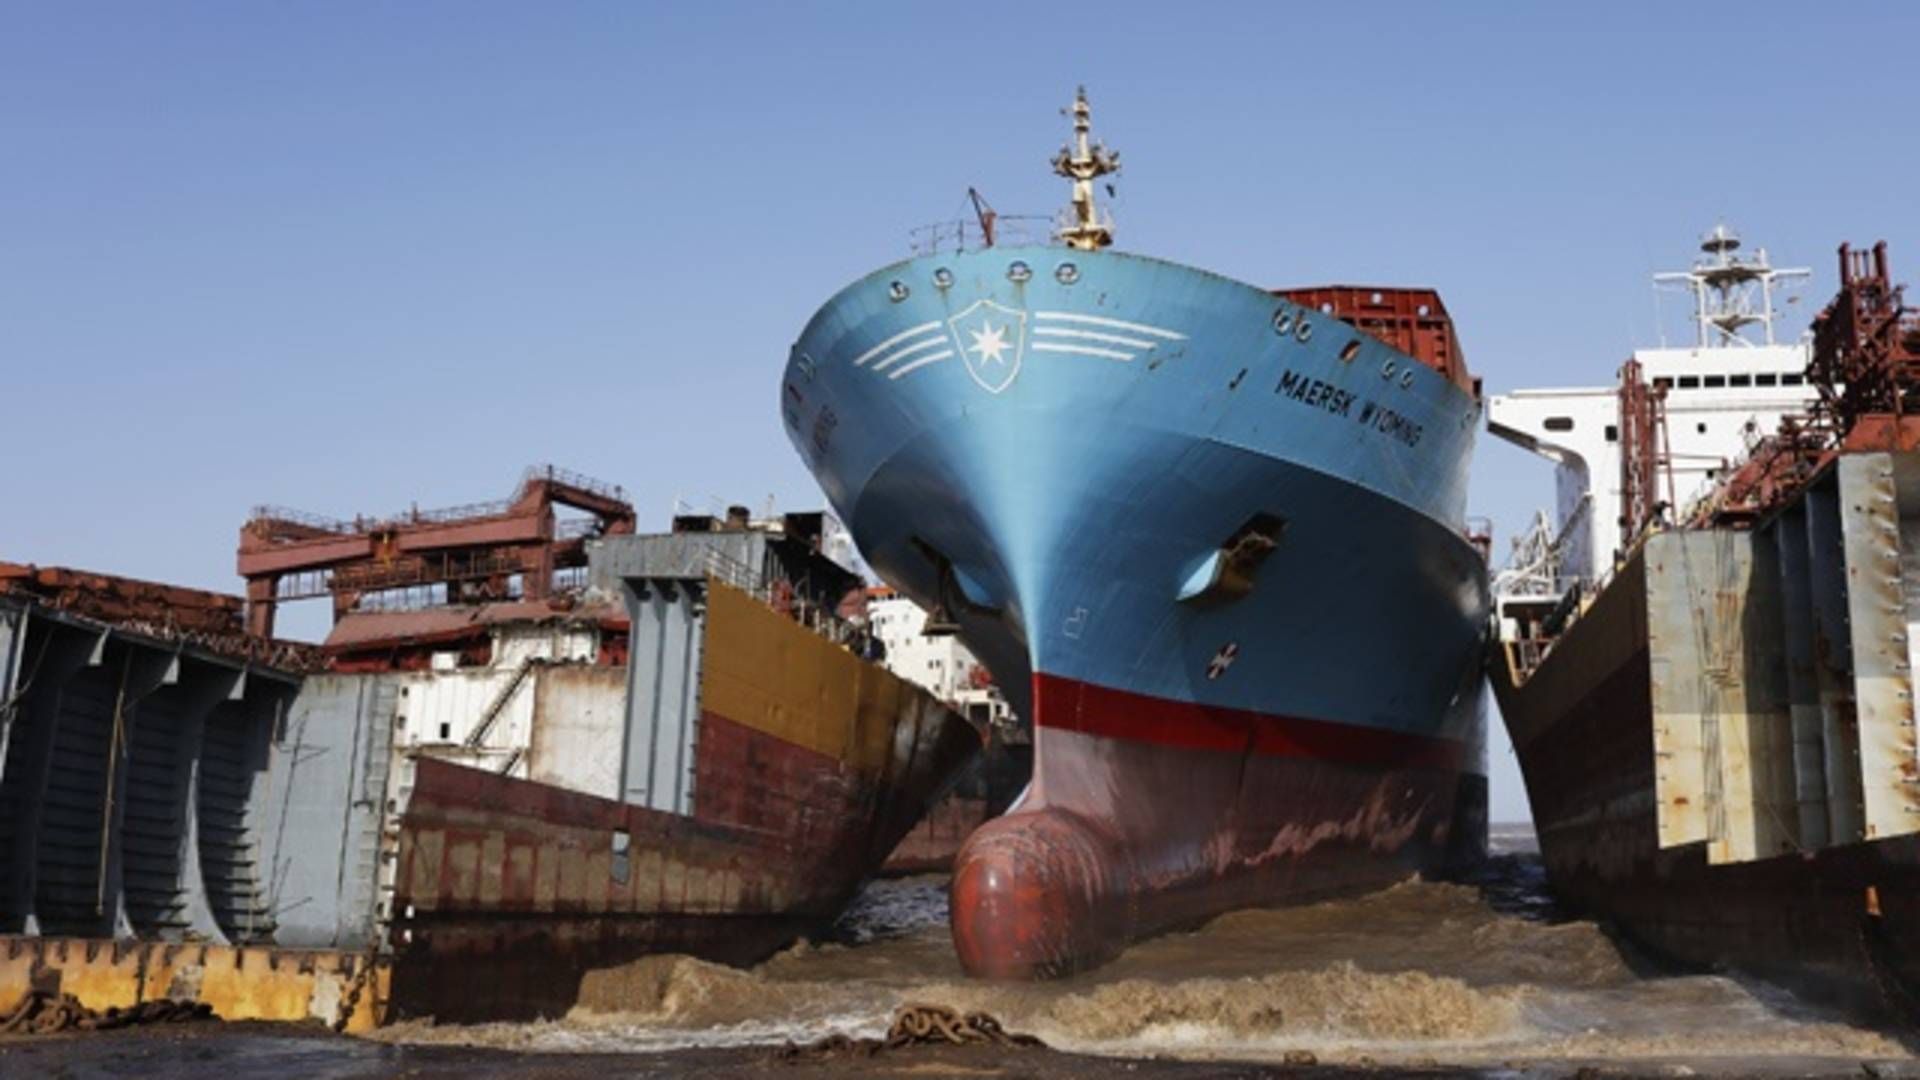 Shipbreaking in Alang, India. File photo. | Photo: PR / Maersk